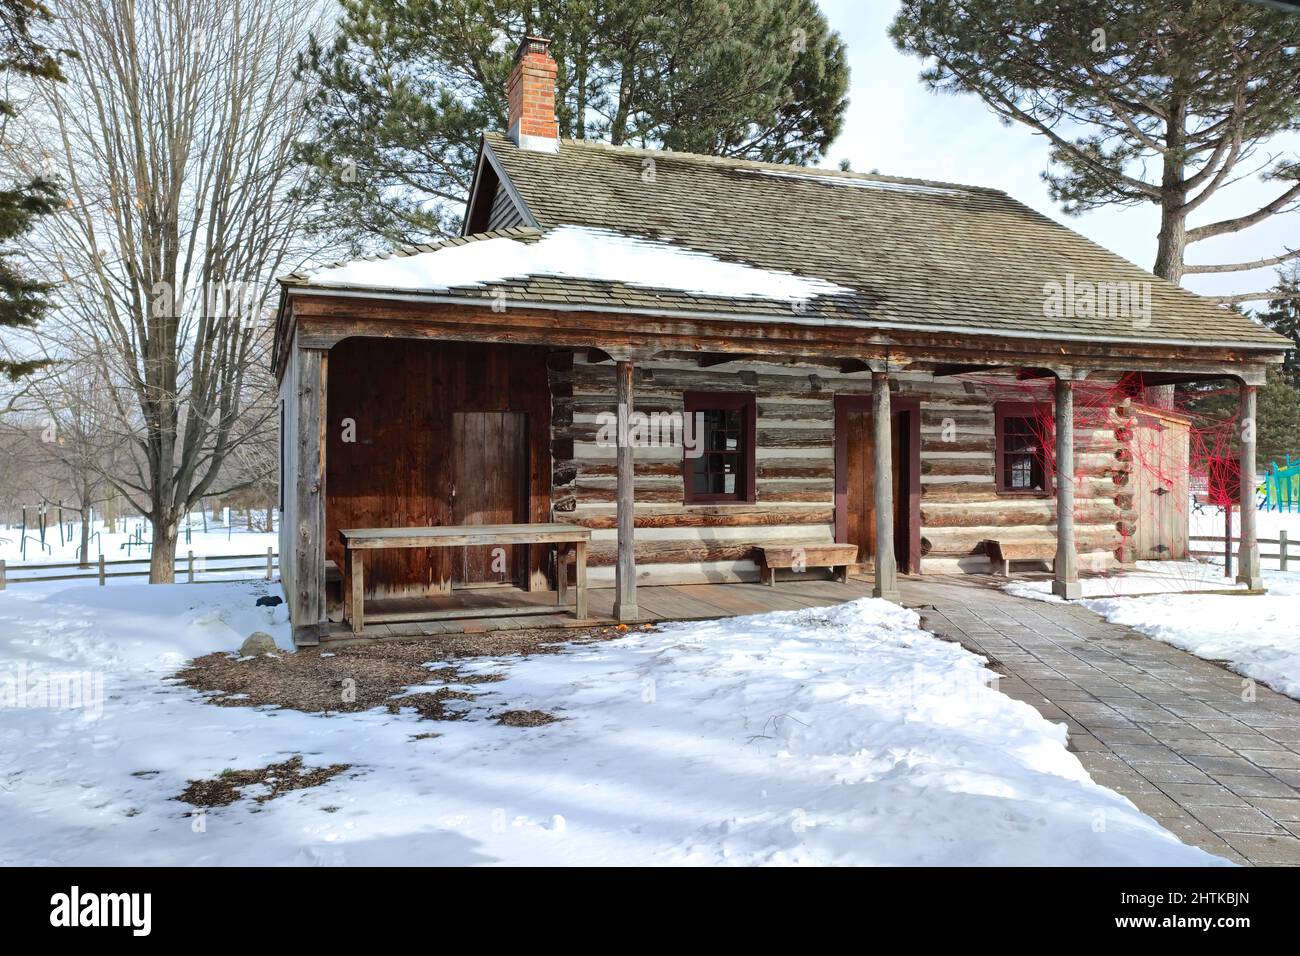 Snowy log cabin in the public park. Stock Photo